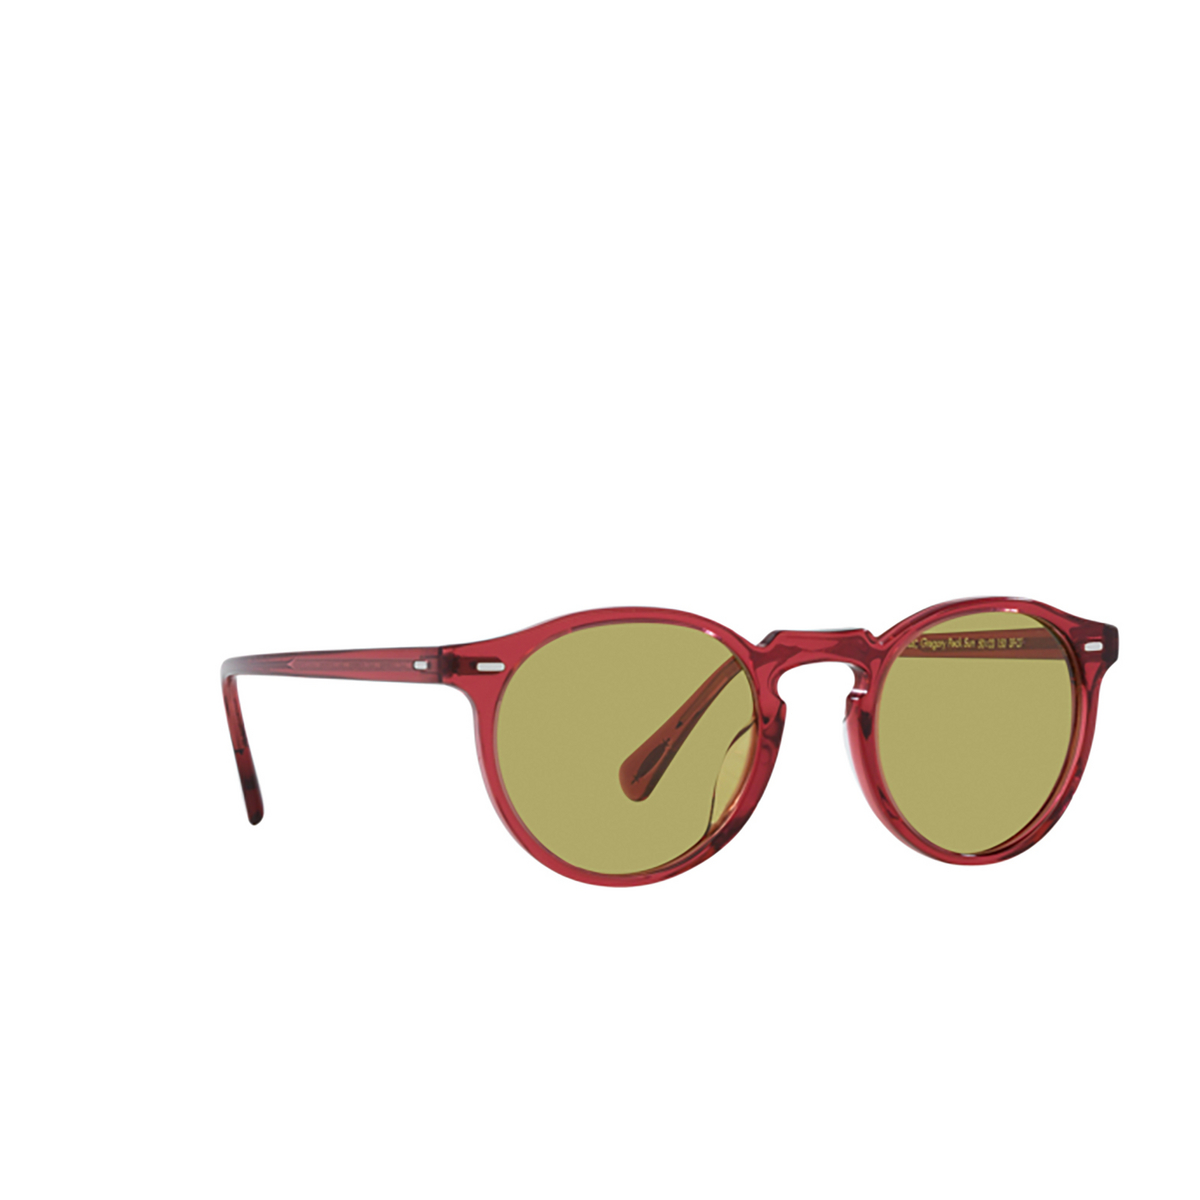 Oliver Peoples GREGORY PECK Sunglasses 17644C Translucent Rust - three-quarters view